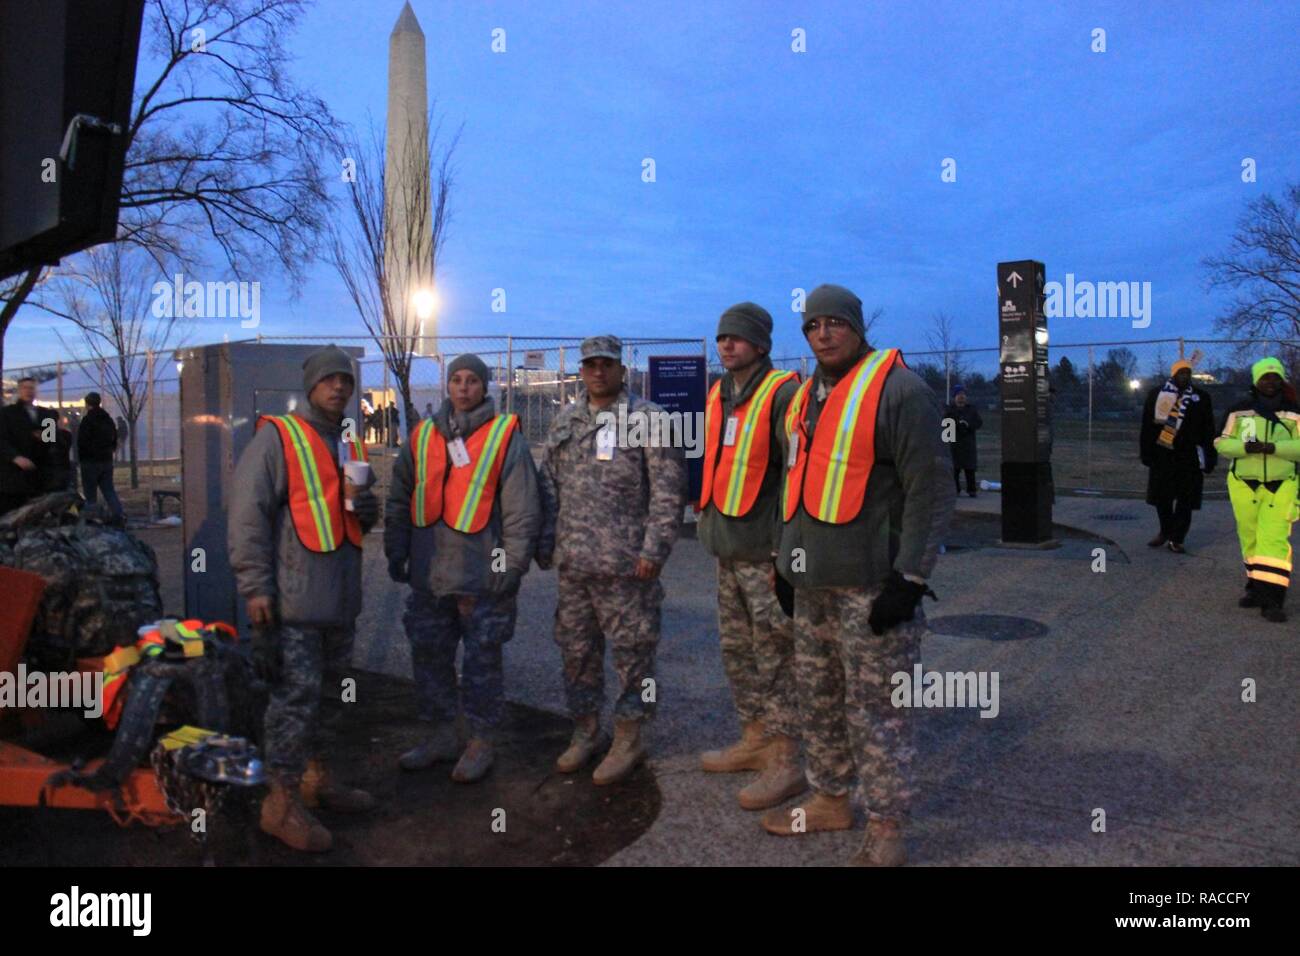 From left, Spc. Jose Gonzalez, Spc. Joan Padilla, Sgt. Julio Adorno, Spc. Mario Gerena, and Sgt. Carlos Lopez of Puerto Rico's 770th Military Police, based in Aguadilla, prepare to guide traffic and crowds at the 58th Presidential Inauguration, in Washington D.C., Jan. 20, 2017. The soldiers assisted at a traffic control point near Constitution Avenue and 17th Street in Washington, D.C. More than 7,500 Guard soldiers and airmen provided support for the event. (National Guard Stock Photo